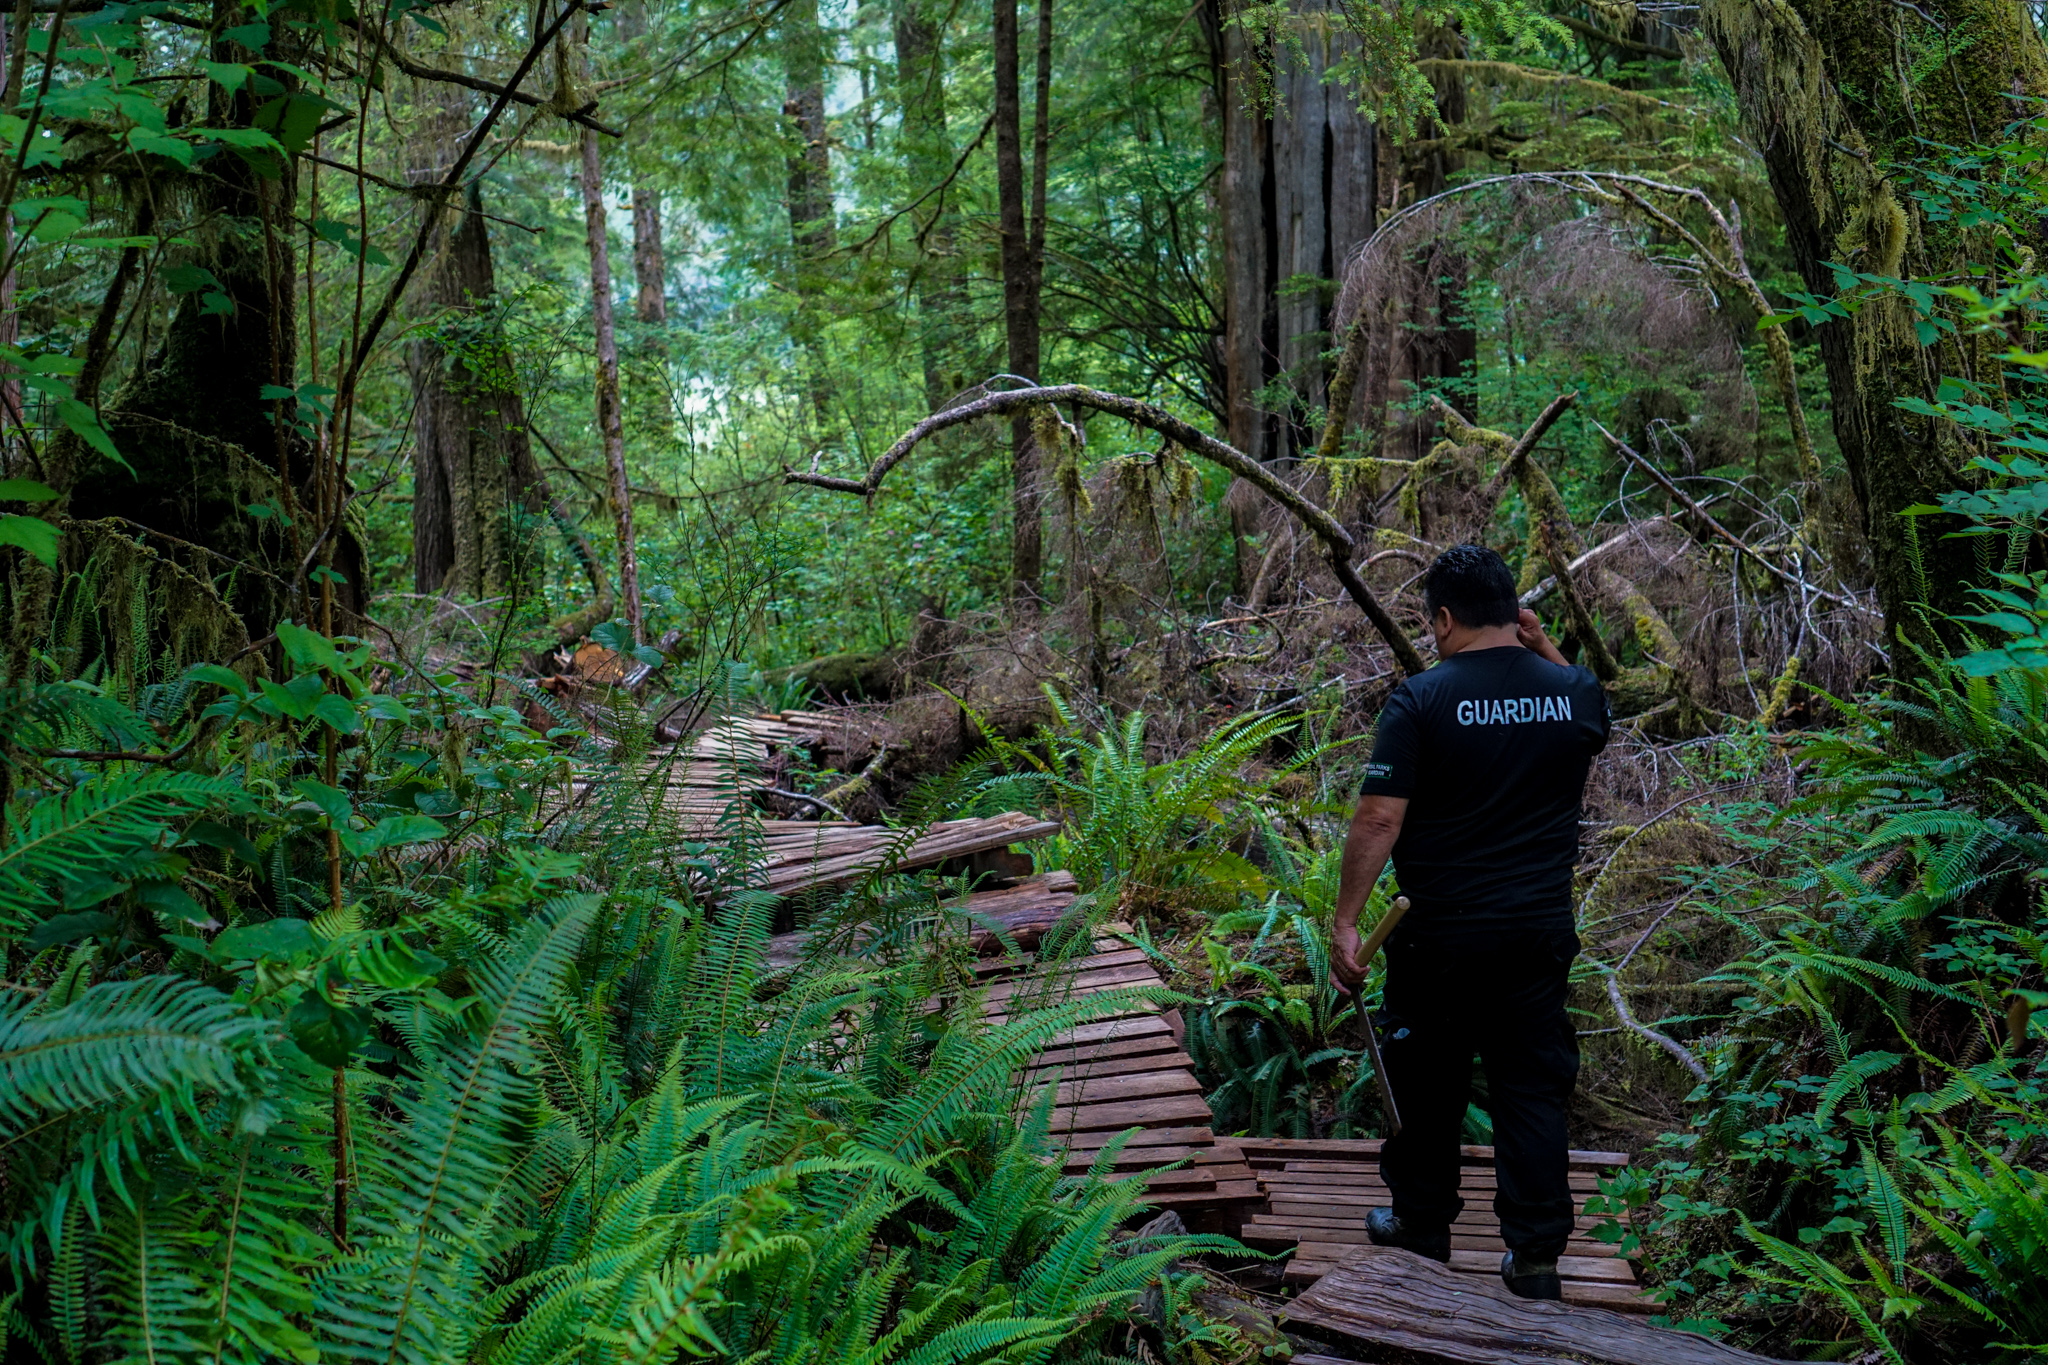 Tofino Tla-o-qui-aht territory, a lush green forest with big trees and ferns. A bumpy wooden boardwalk is in the centre, and a tall man dressed in black with a t-shirt that says "GUARDIAN" walks into the distance.